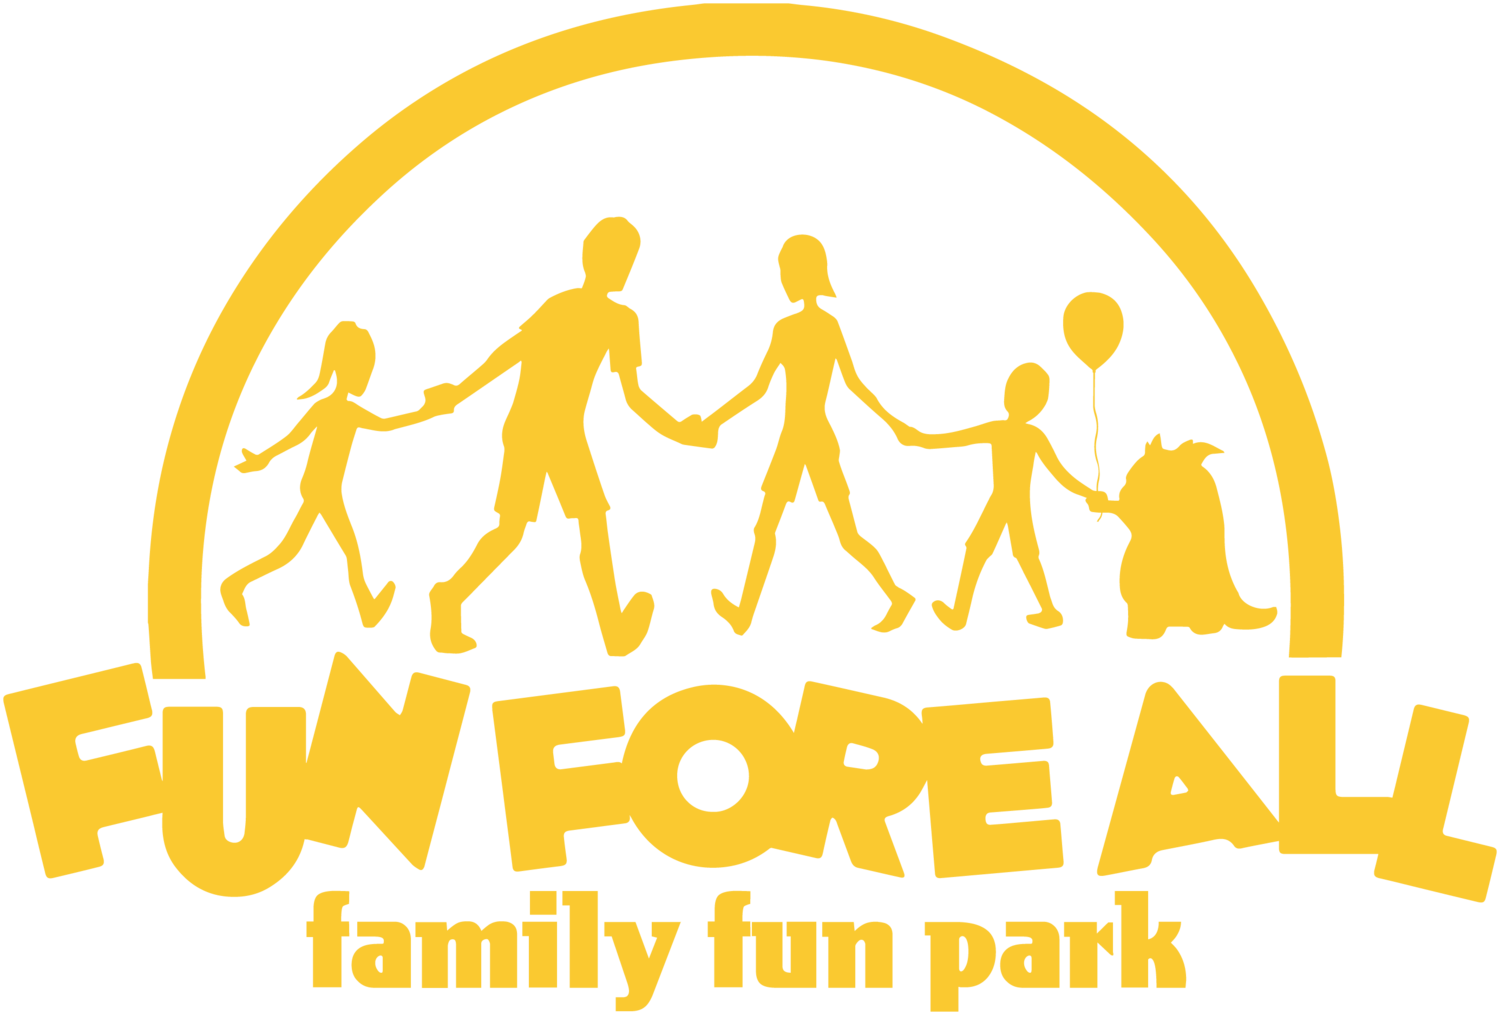 park clipart family day out